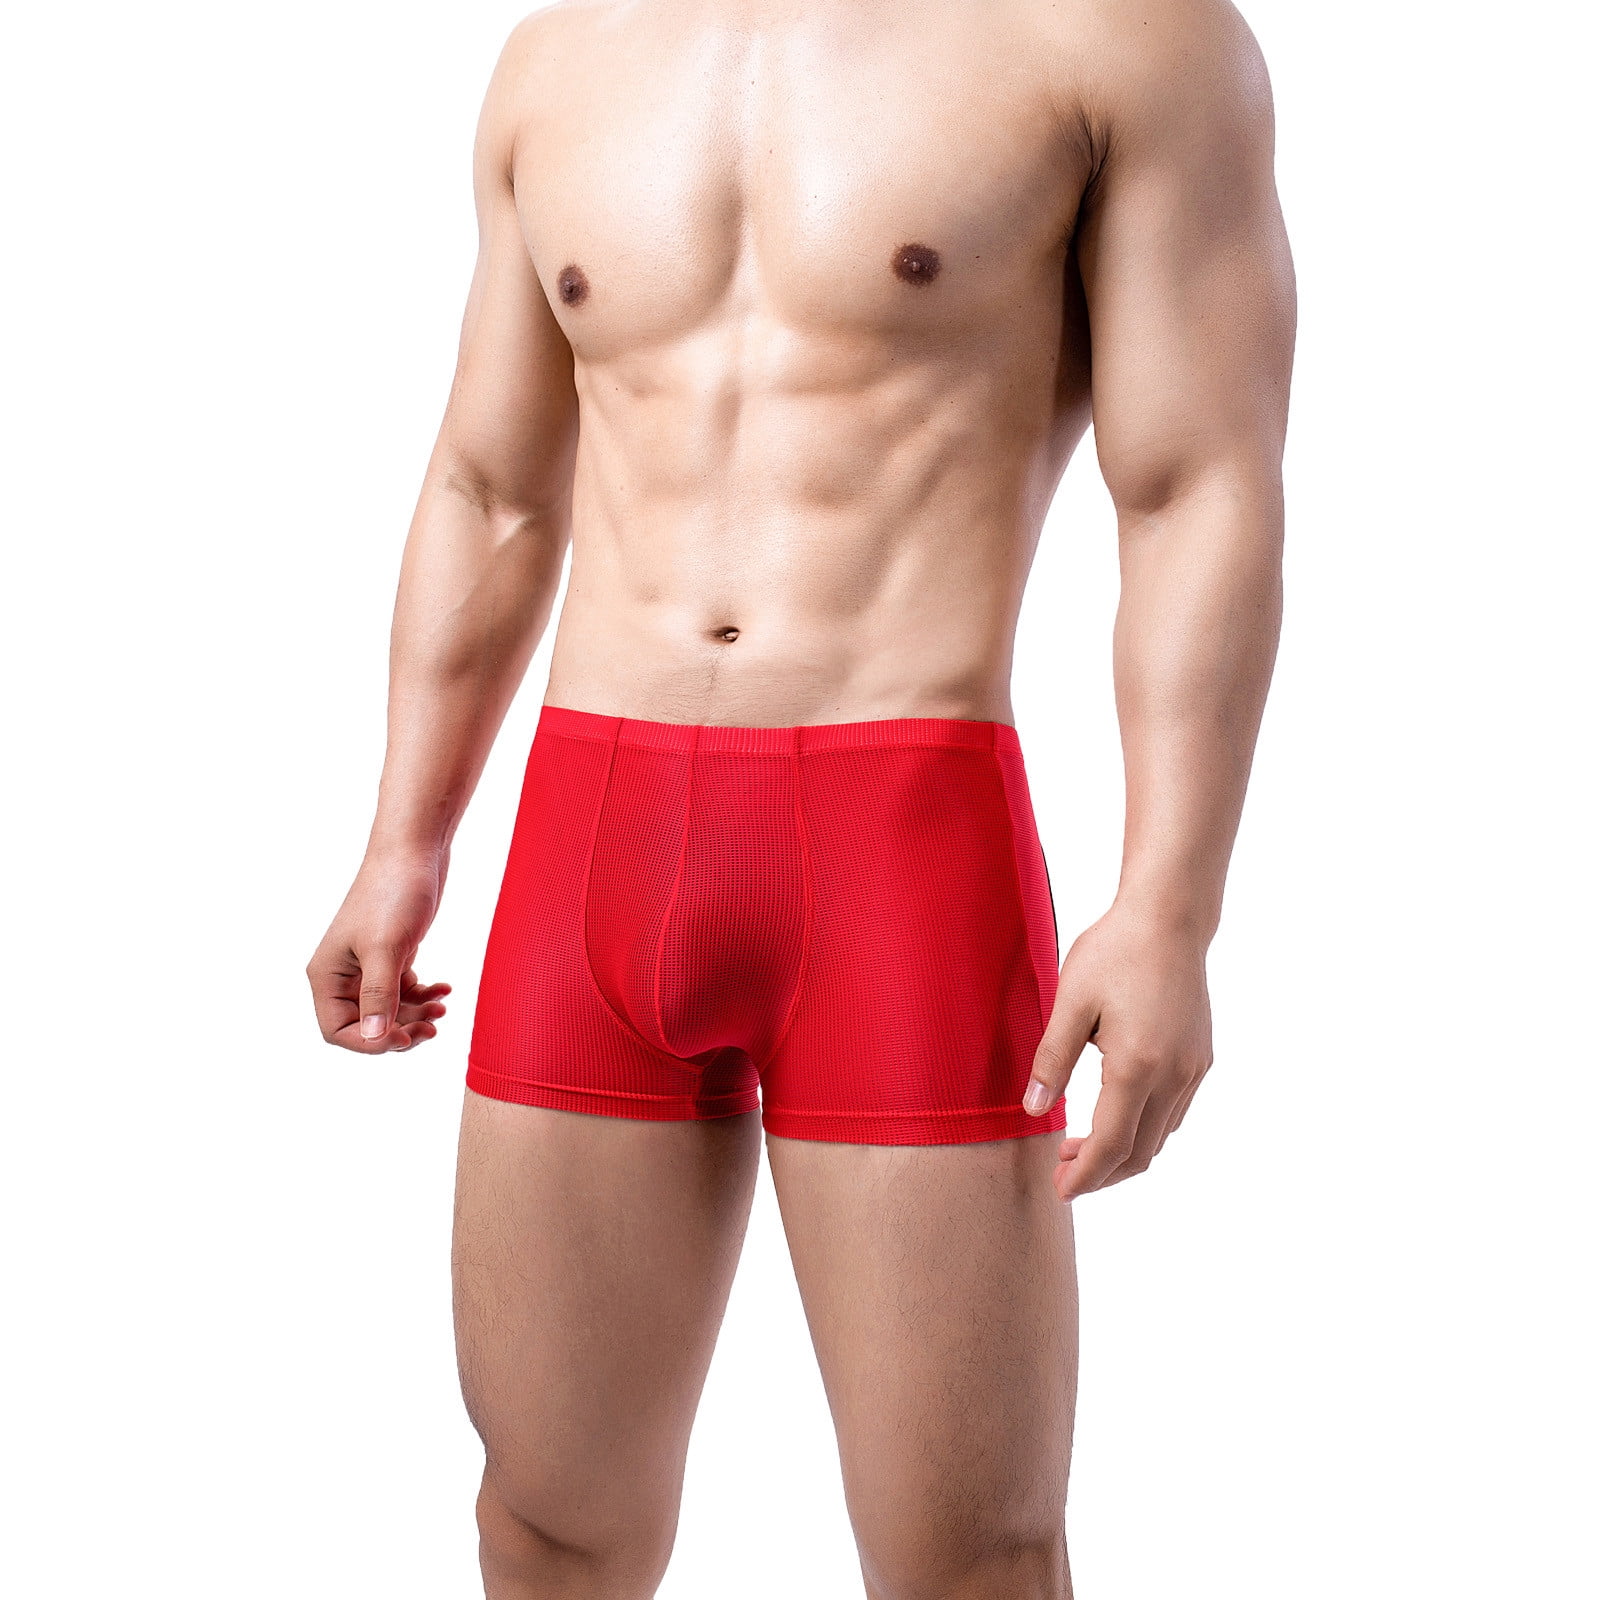 aiyuq.u men's underwear boxer briefs mesh breathable underpants Valentines  Gifts for Her 